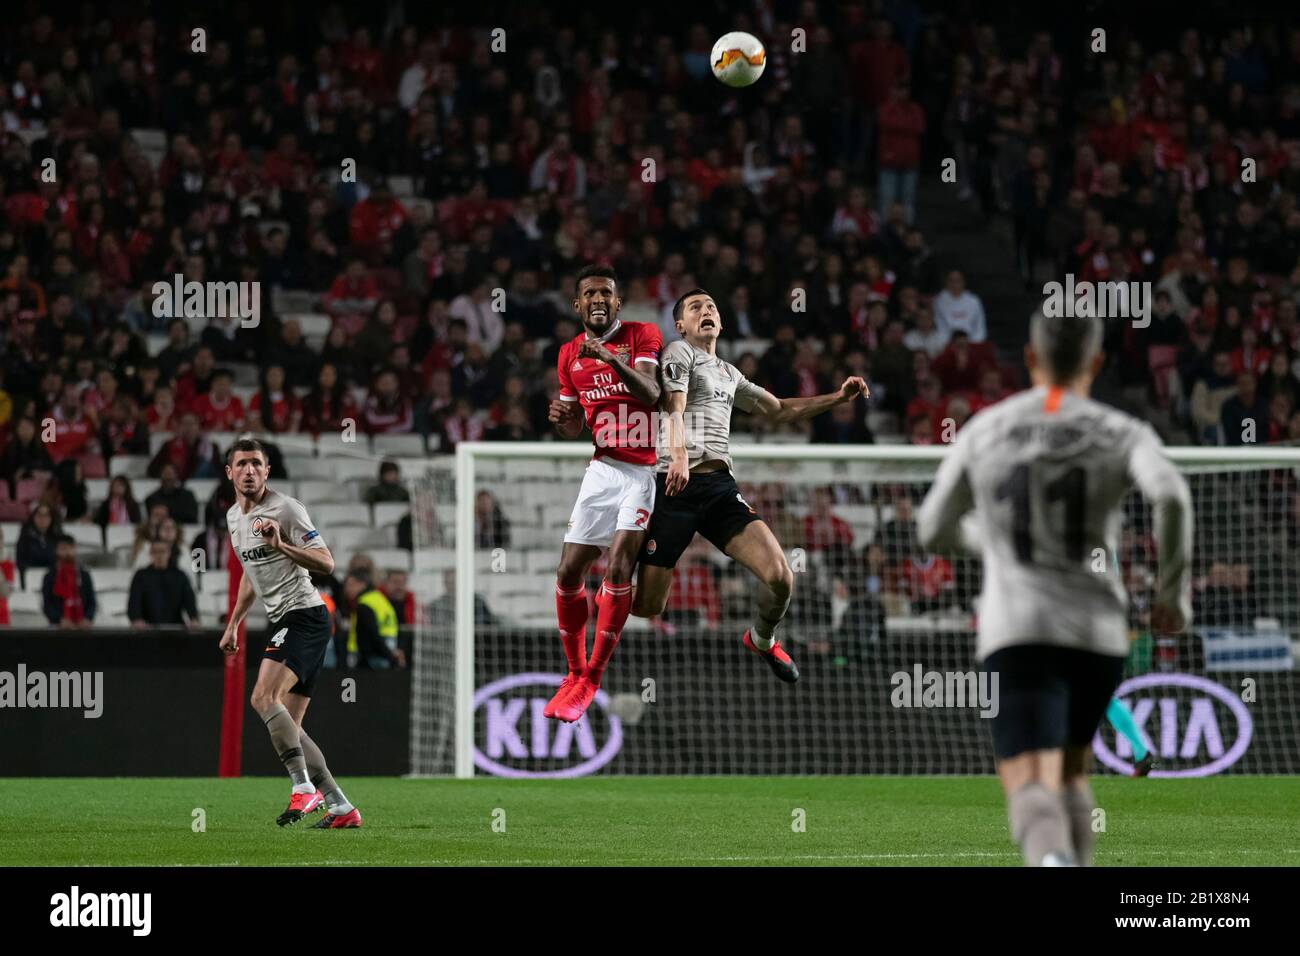 Lisbon, Portugal. 27th Feb, 2020. Dyego Sousa of SL Benfica and Taras Stepanenko of FC Shakhtar Donetsk are seen in action during the UEFA Europa League Match 2019/20 between SL Benfica and FC Shakhtar Donetskt at Estádio da Luz in Lisbon.(Final score: SL Benfica 3:3 FC Shakhtar Donetskt) Credit: SOPA Images Limited/Alamy Live News Stock Photo